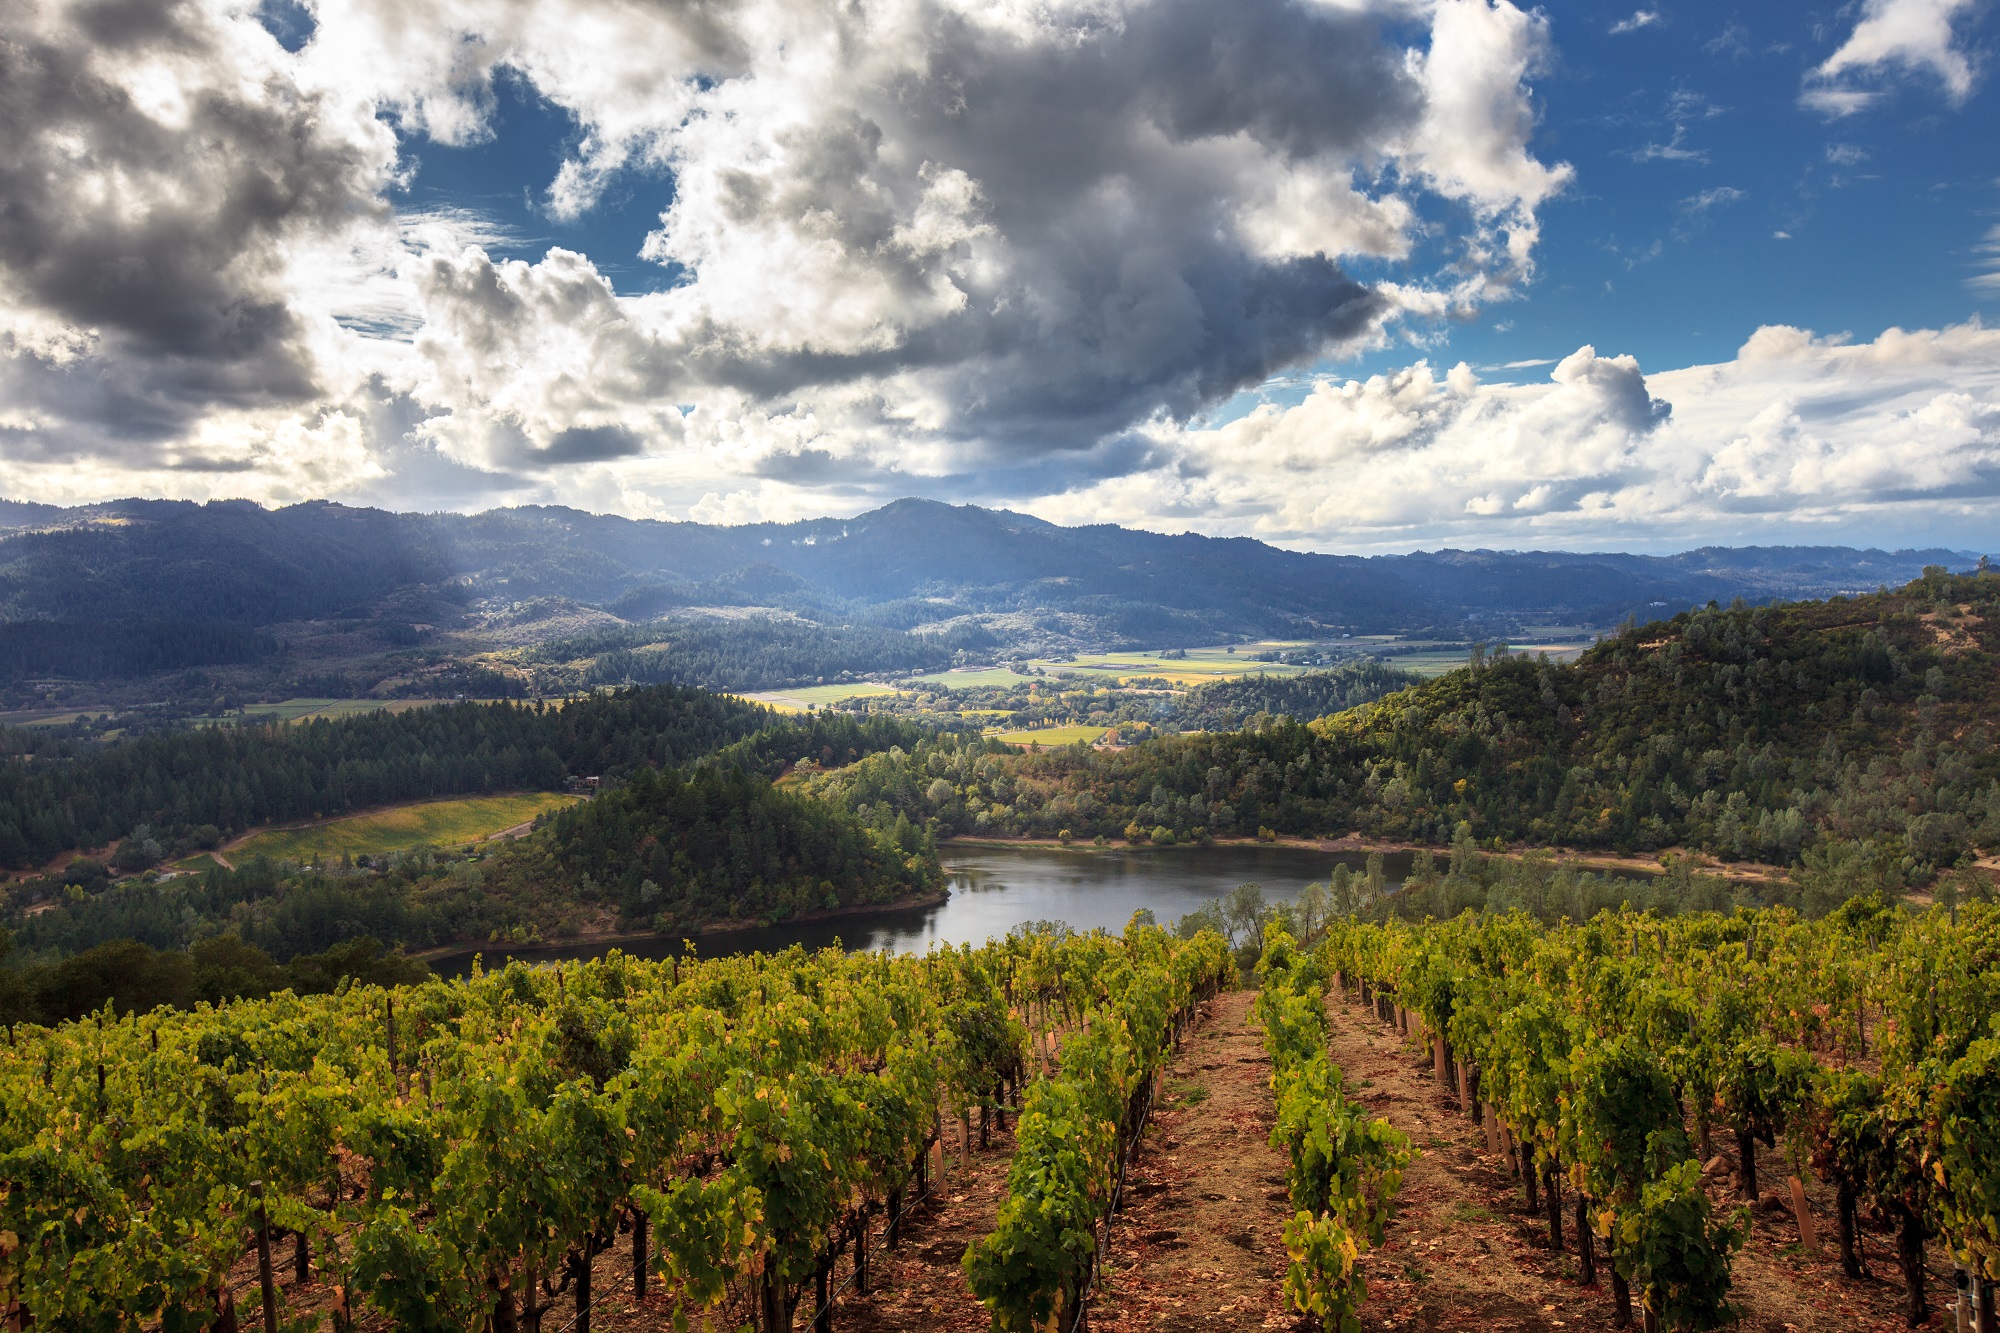 The magnificent terroir of Napa